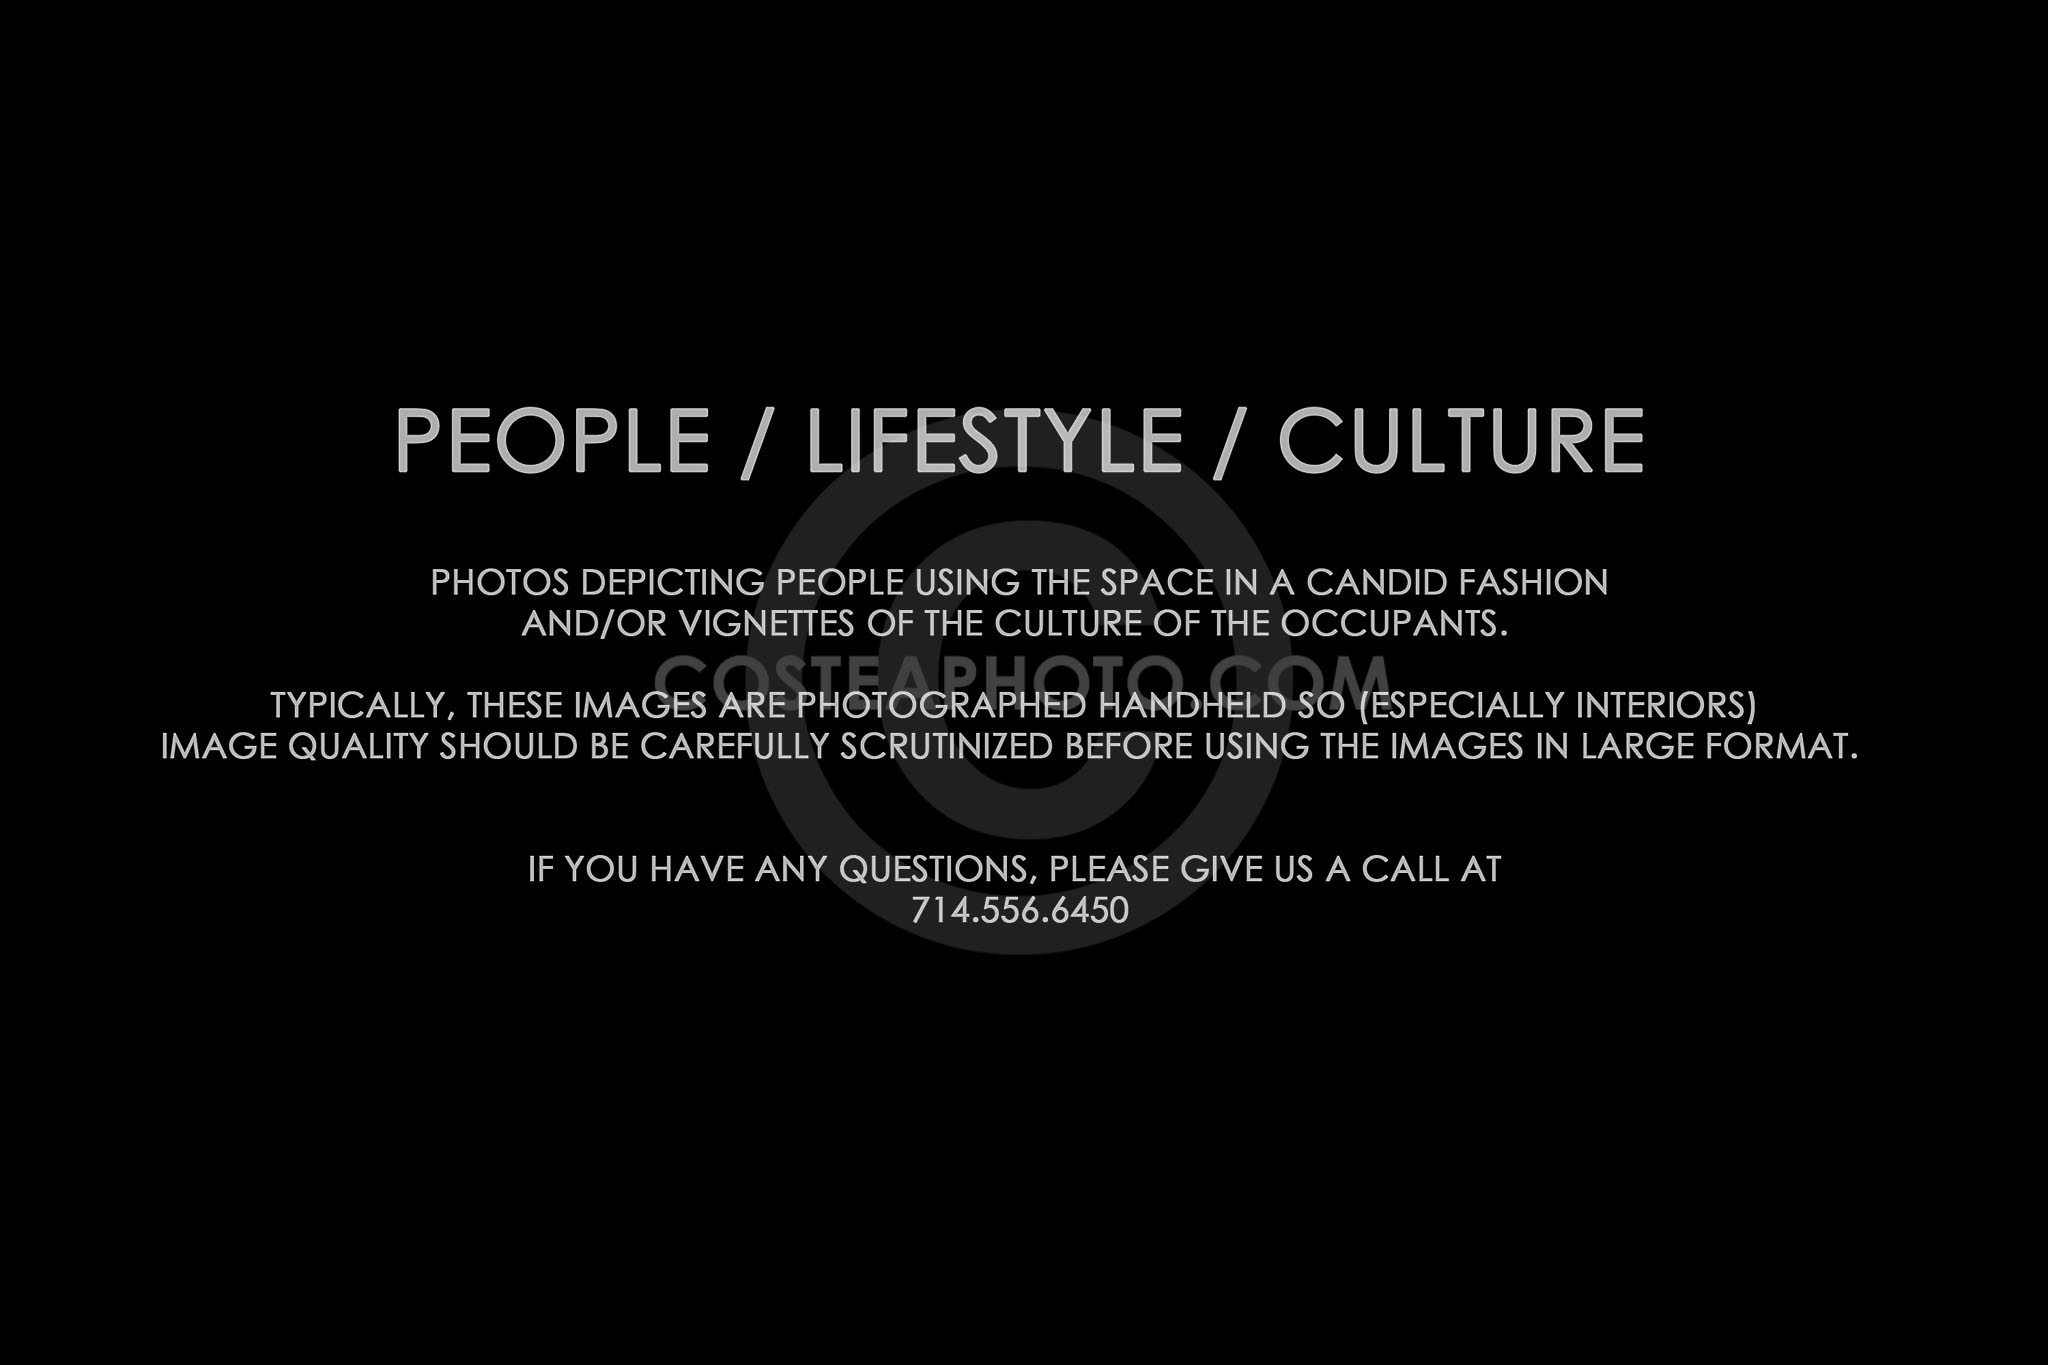 (146) TITLE PAGE - PEOPLE LIFESTYLE